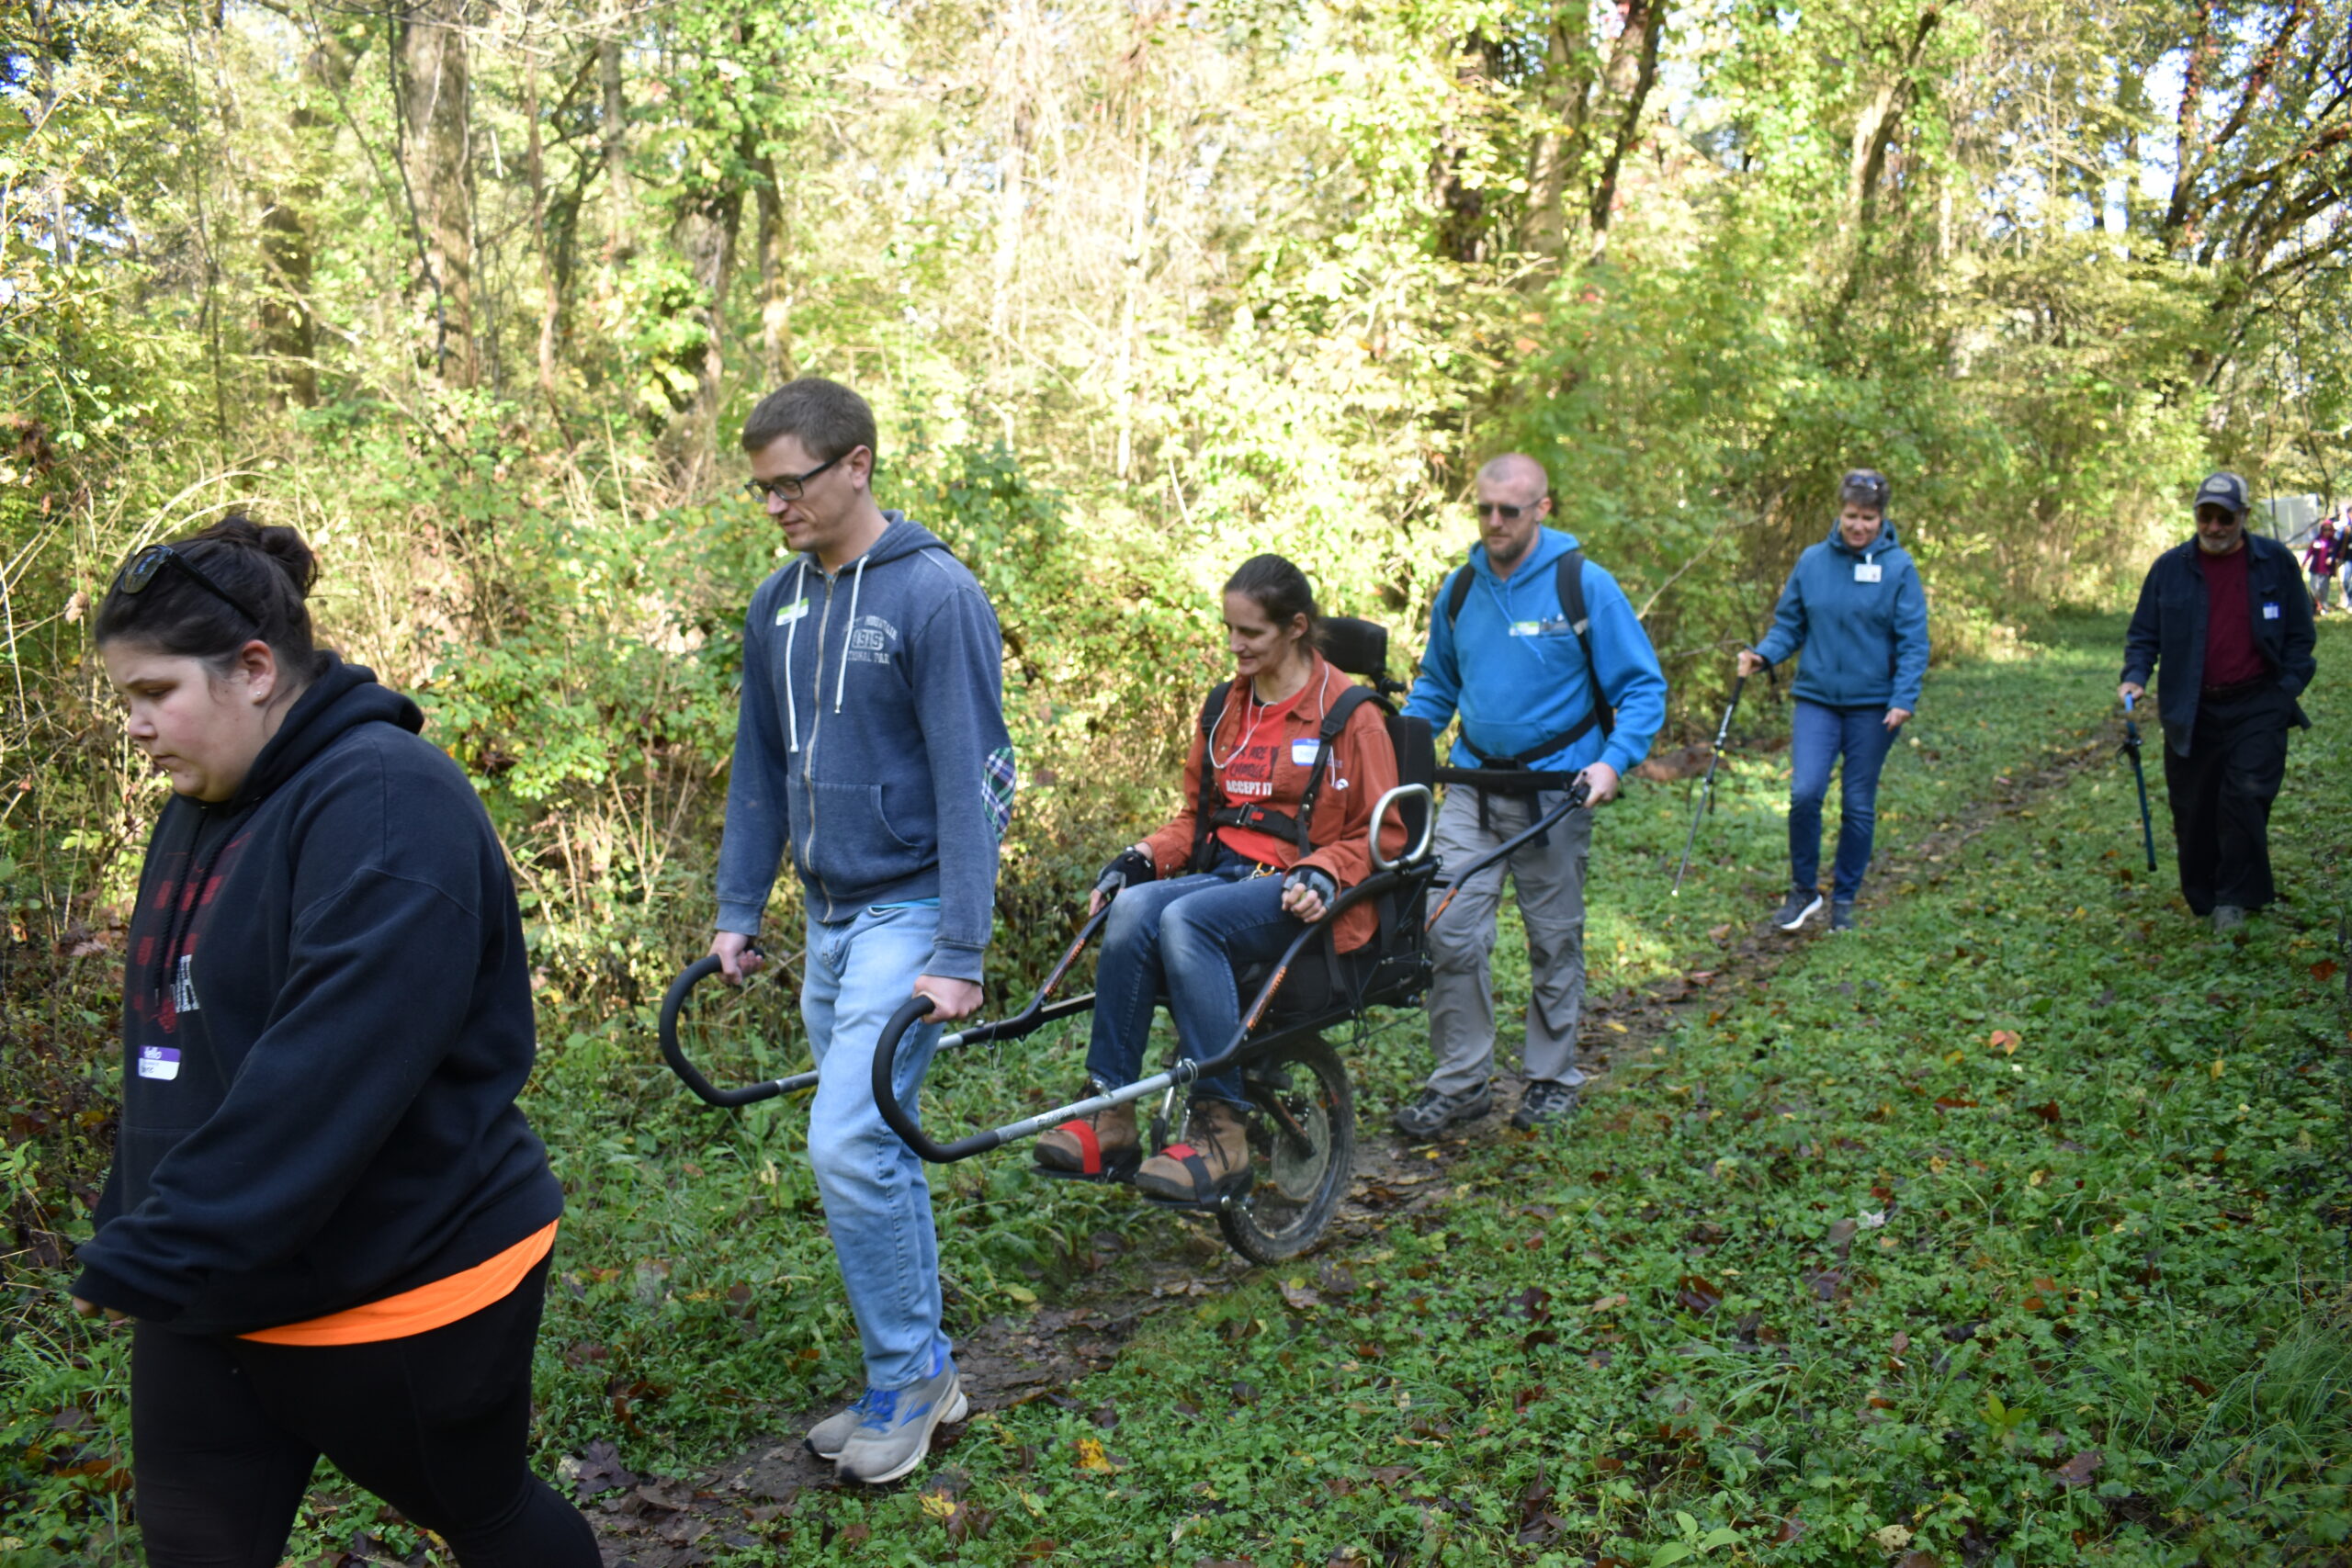 People participating in the accessible hike with Luke5Adventures and CABVI.